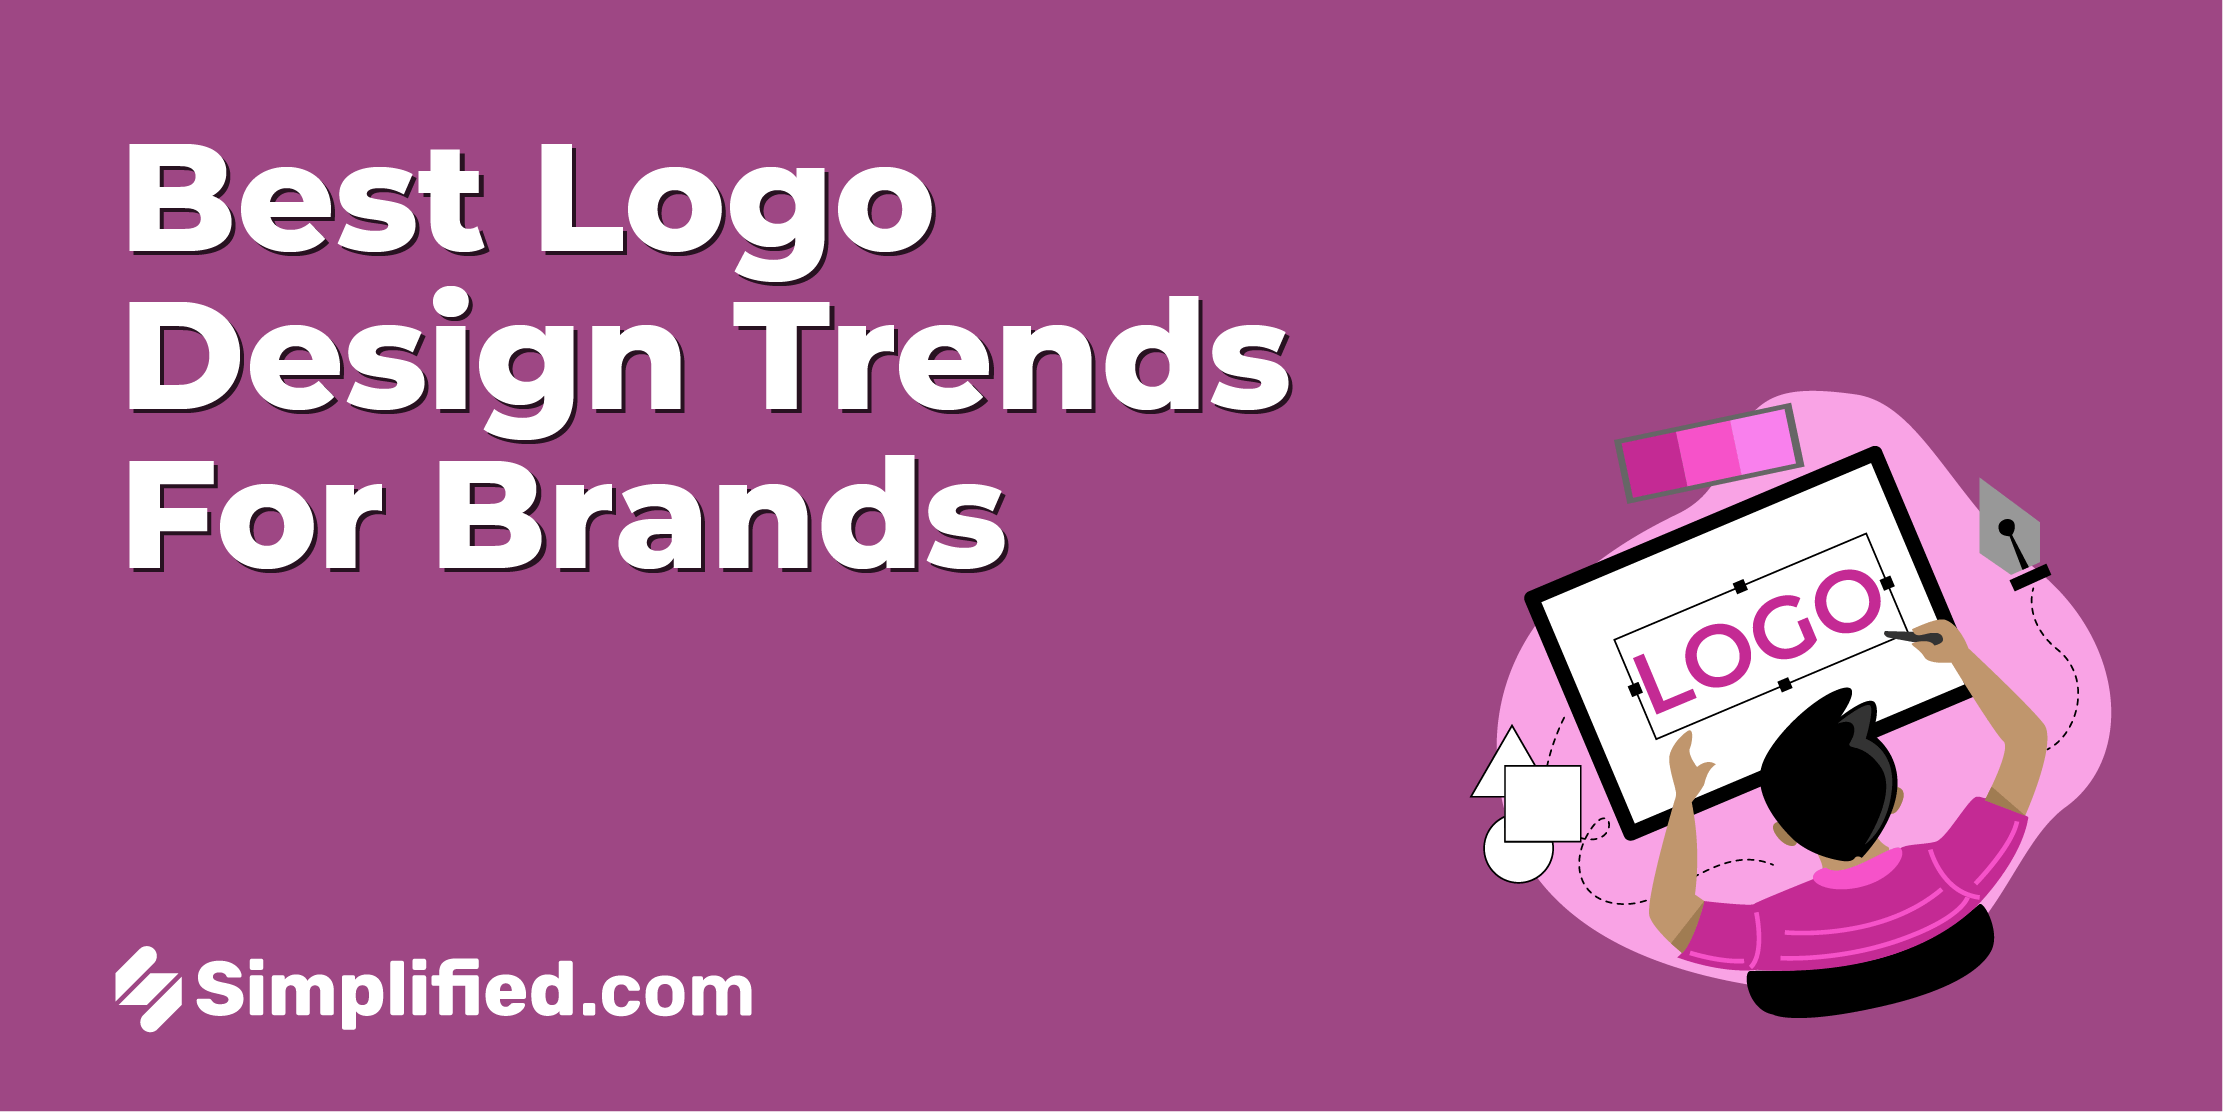 The Best Logo Design Trends For Brands in 2023 ⎮ Simplified